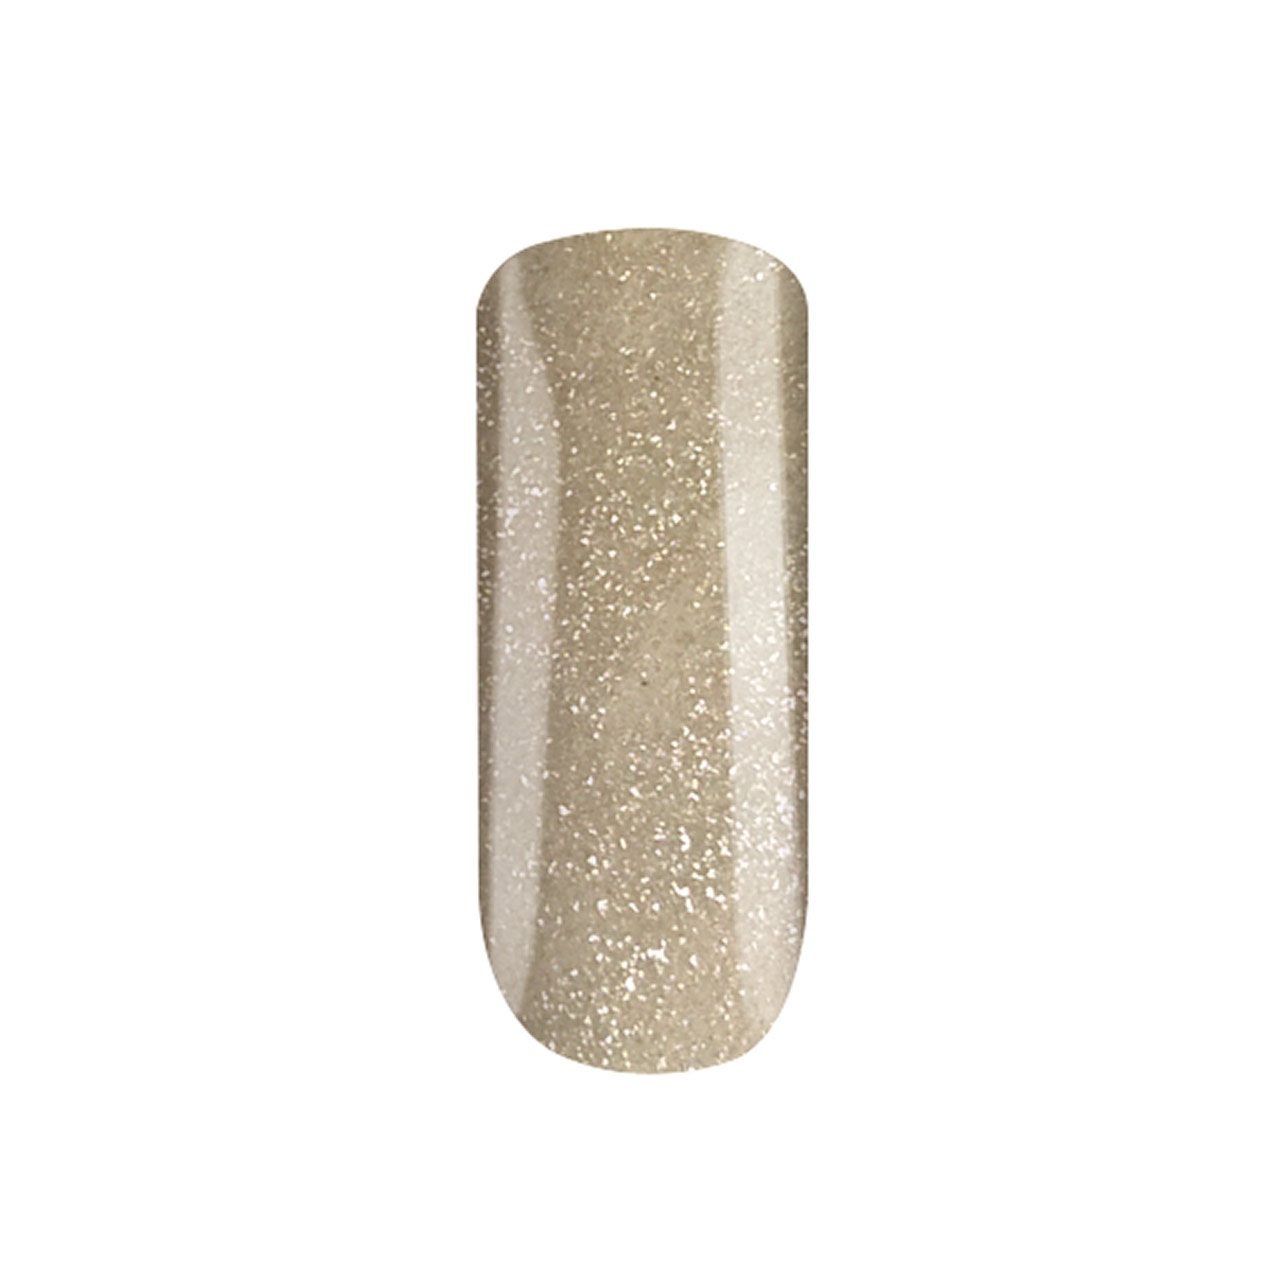 BAEHR BEAUTY CONCEPT - NAILS Nagellack prosecco 11 ml